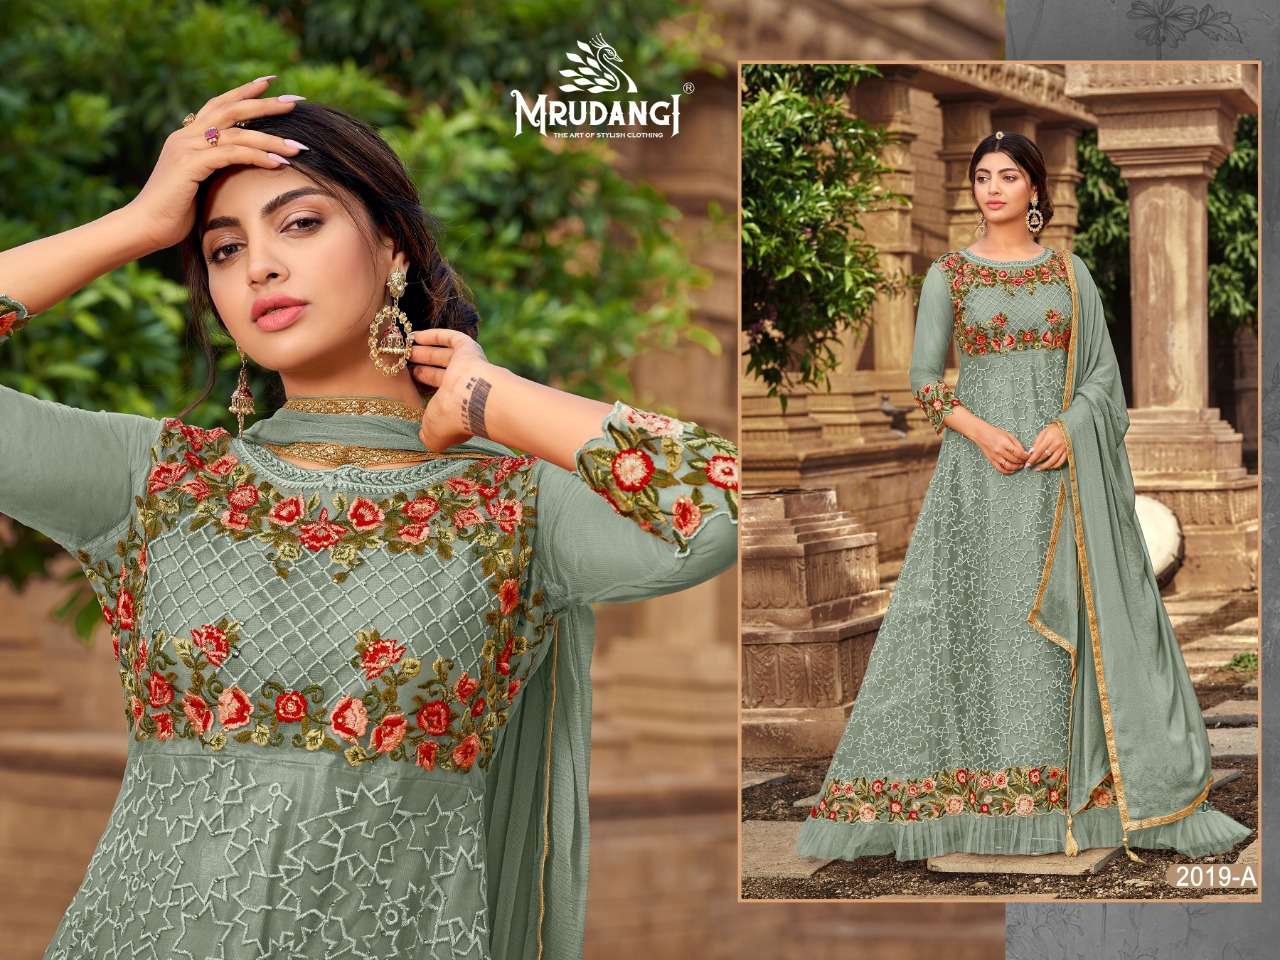 SANJH 2019 COLOURS BY MRUDANGI 2019 TO 2019-C SERIES BEAUTIFUL STYLISH ANARKALI SUITS FANCY COLORFUL CASUAL WEAR & ETHNIC WEAR & READY TO WEAR HEAVY BUTTERFLY NET EMBROIDERED DRESSES AT WHOLESALE PRICE